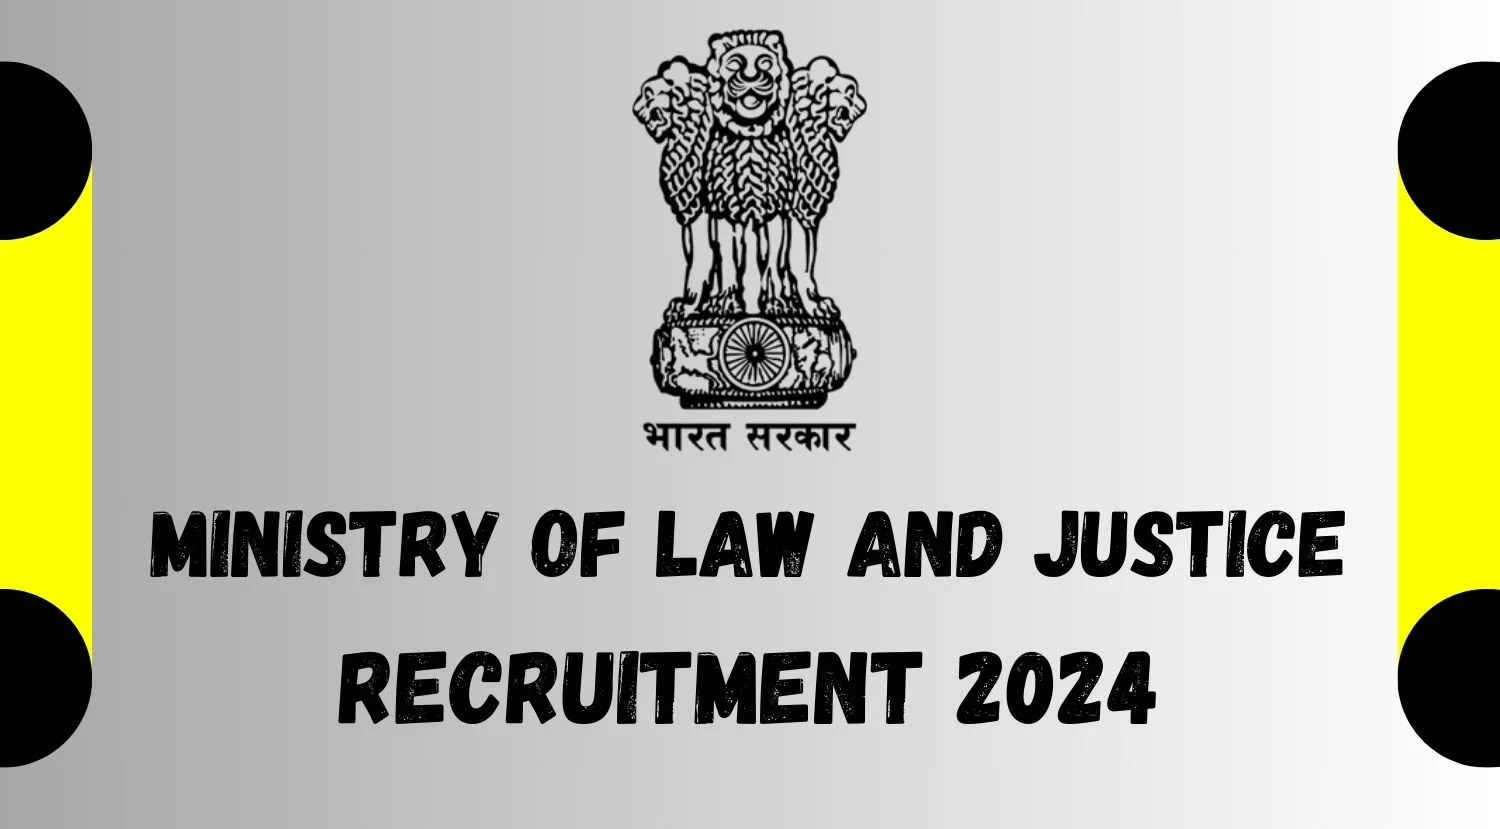 Ministry of Law and Justice Vice-President, Member (Judicial), and Member (Accountant) Recruitment 2024